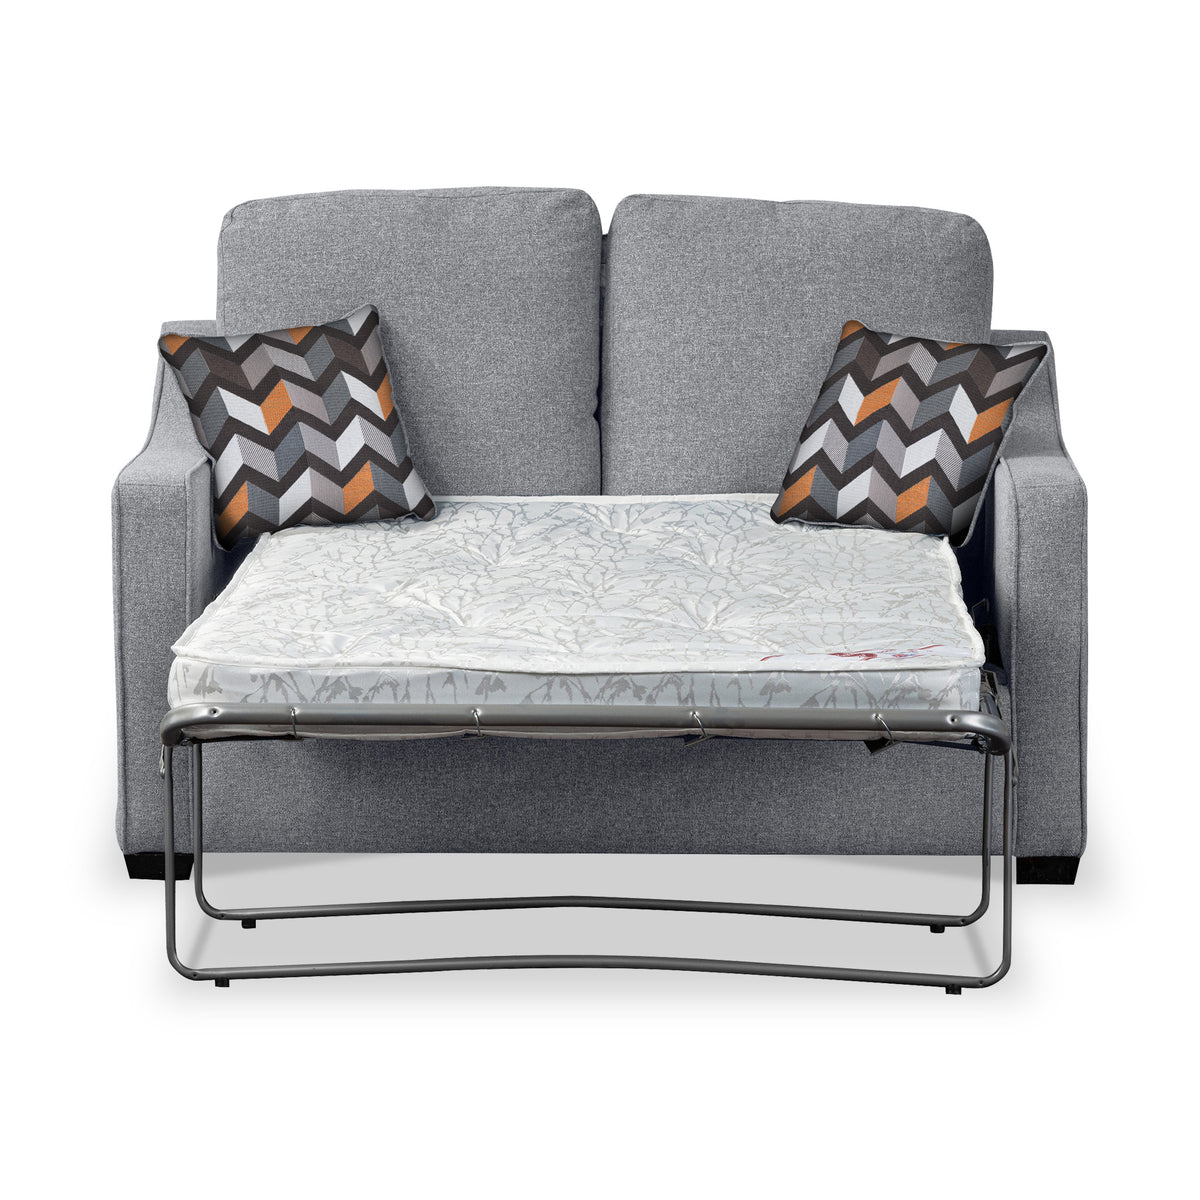 Charlcote Silver Faux Linen 2 Seater Sofabed with Charcoal Scatter Cushions from Roseland Furniture